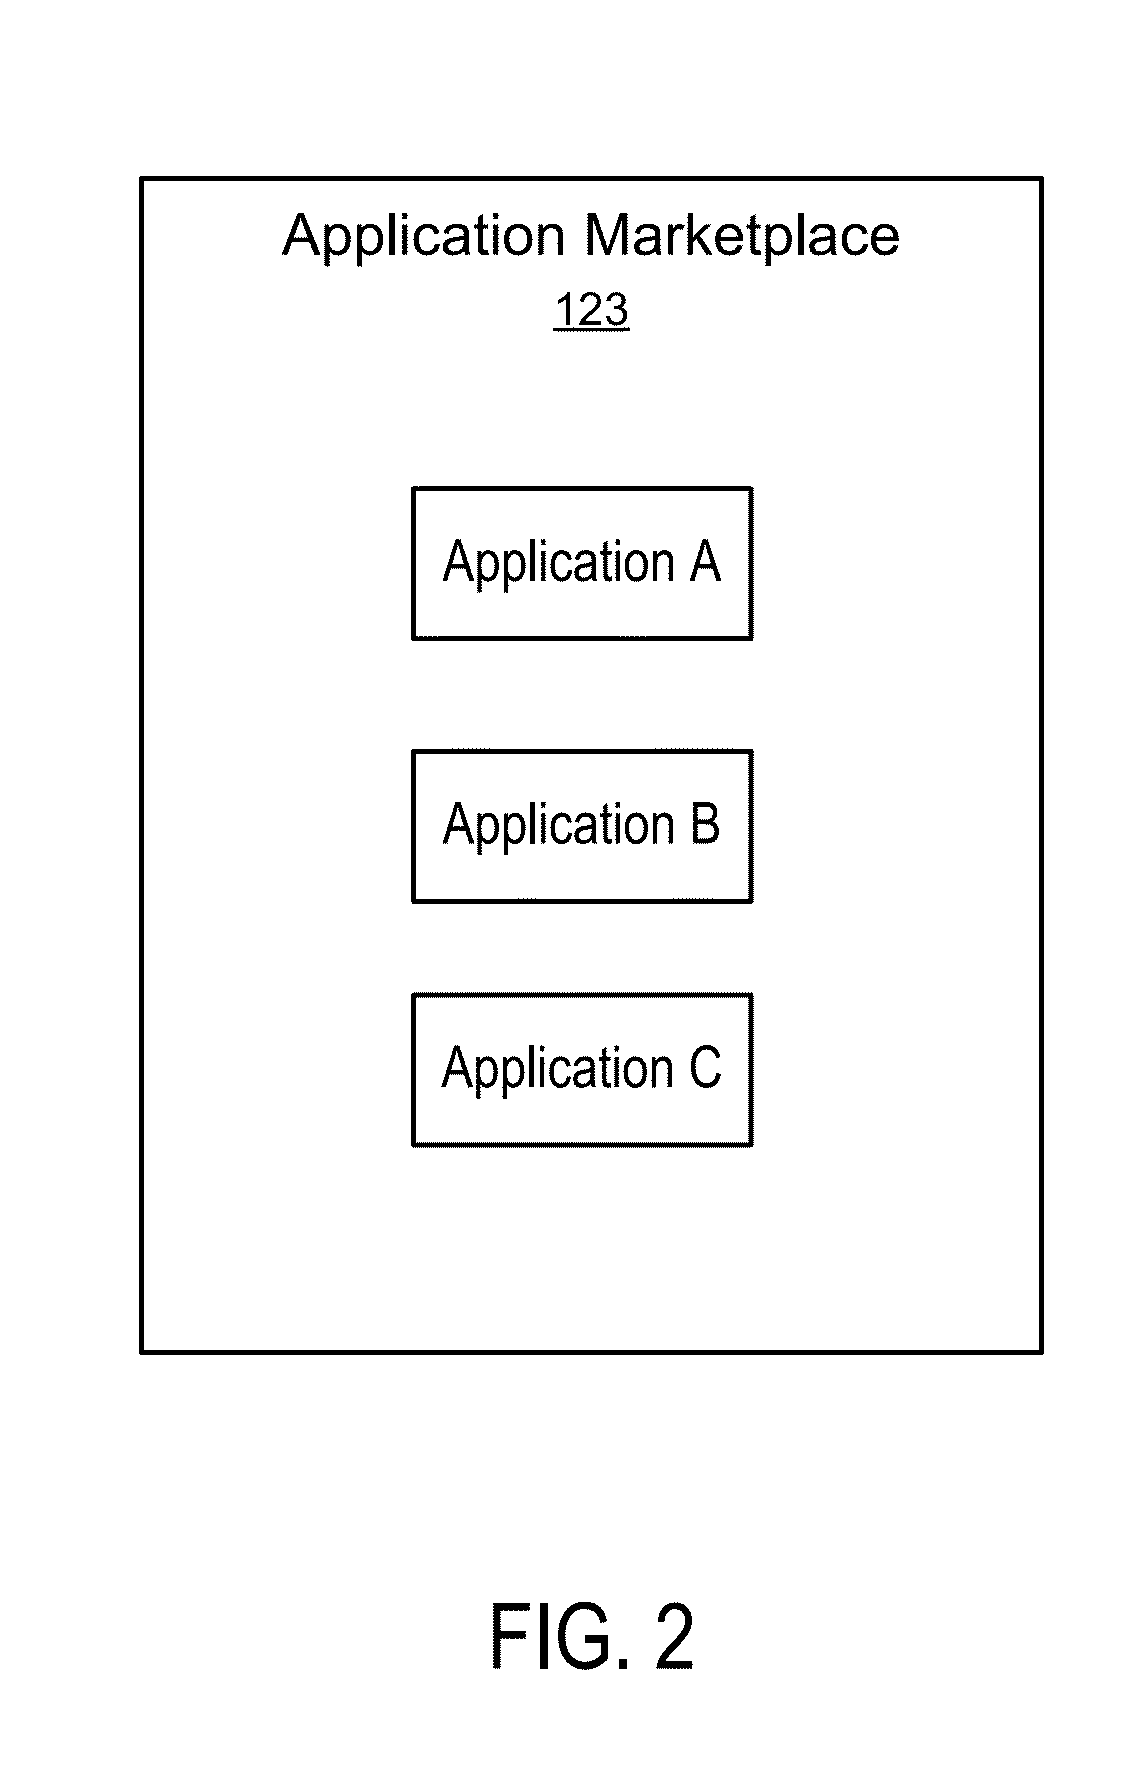 Expressing intent to control behavior of application components